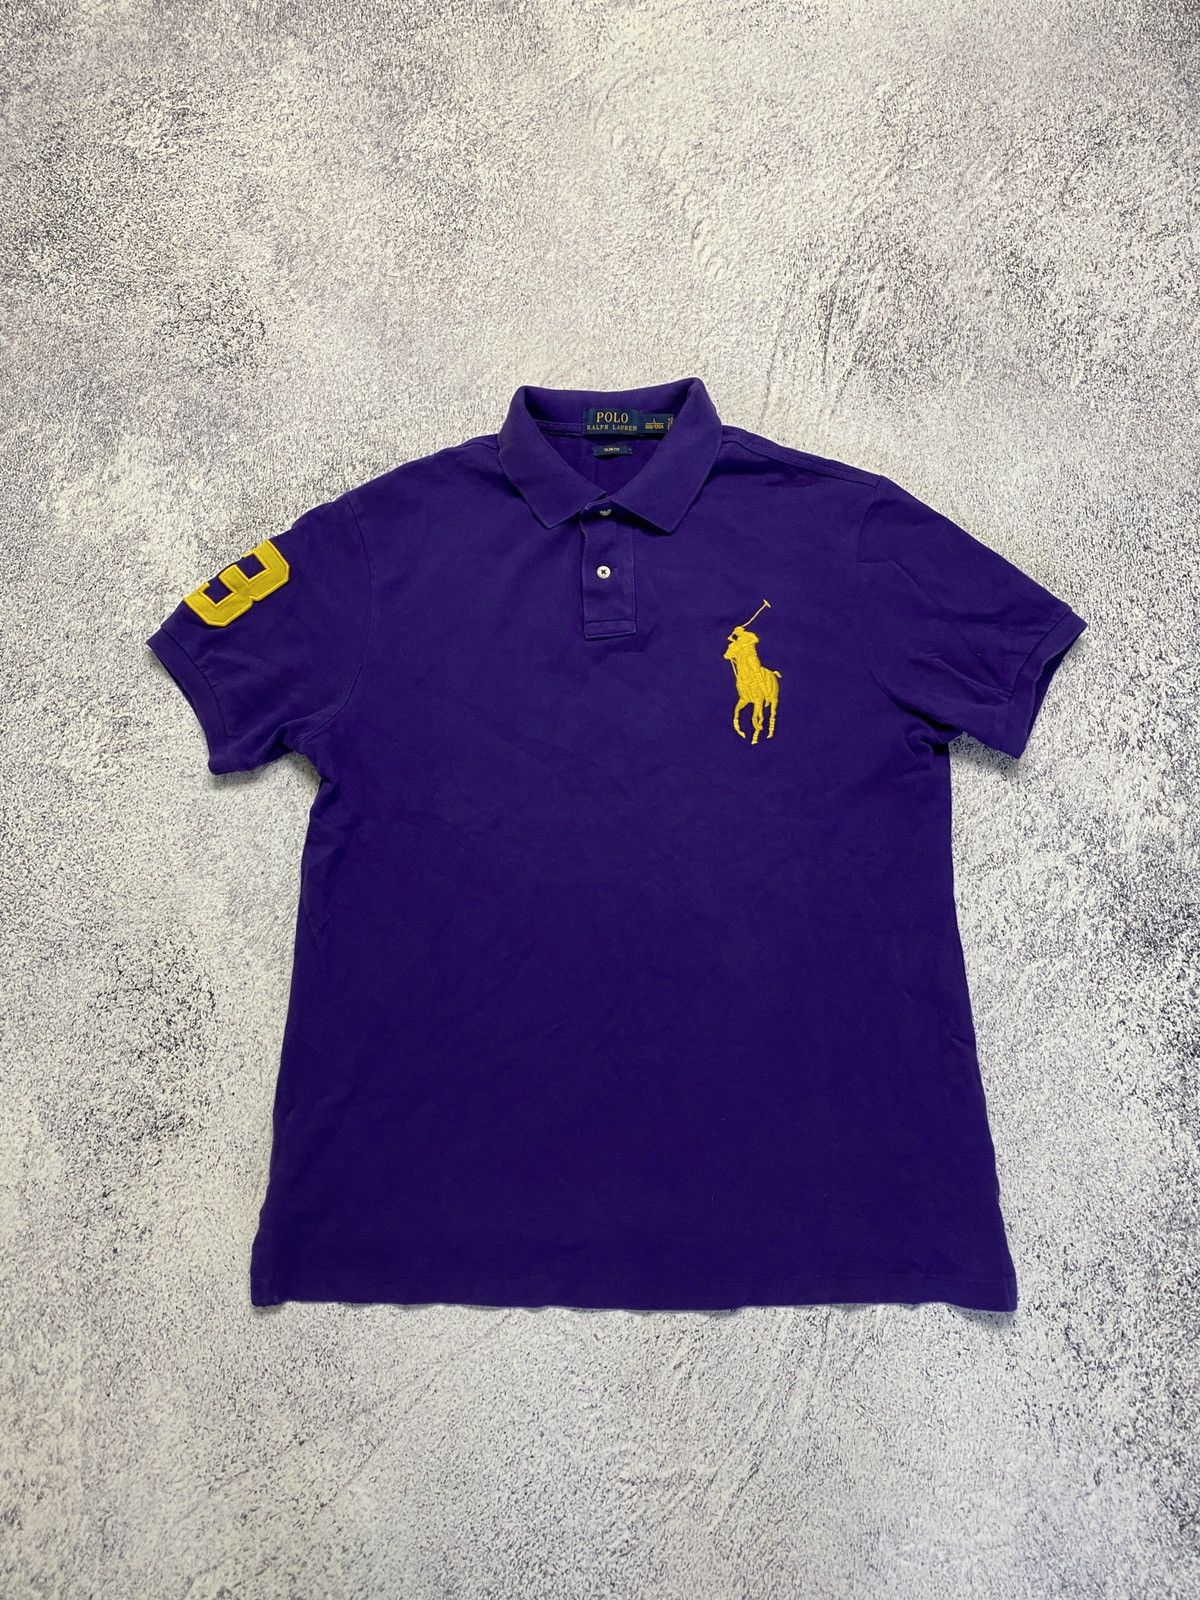 Pre-owned Polo Ralph Lauren X Vintage Polo Ralph Laurent Big Pony 3 Rugby Shirt Purple